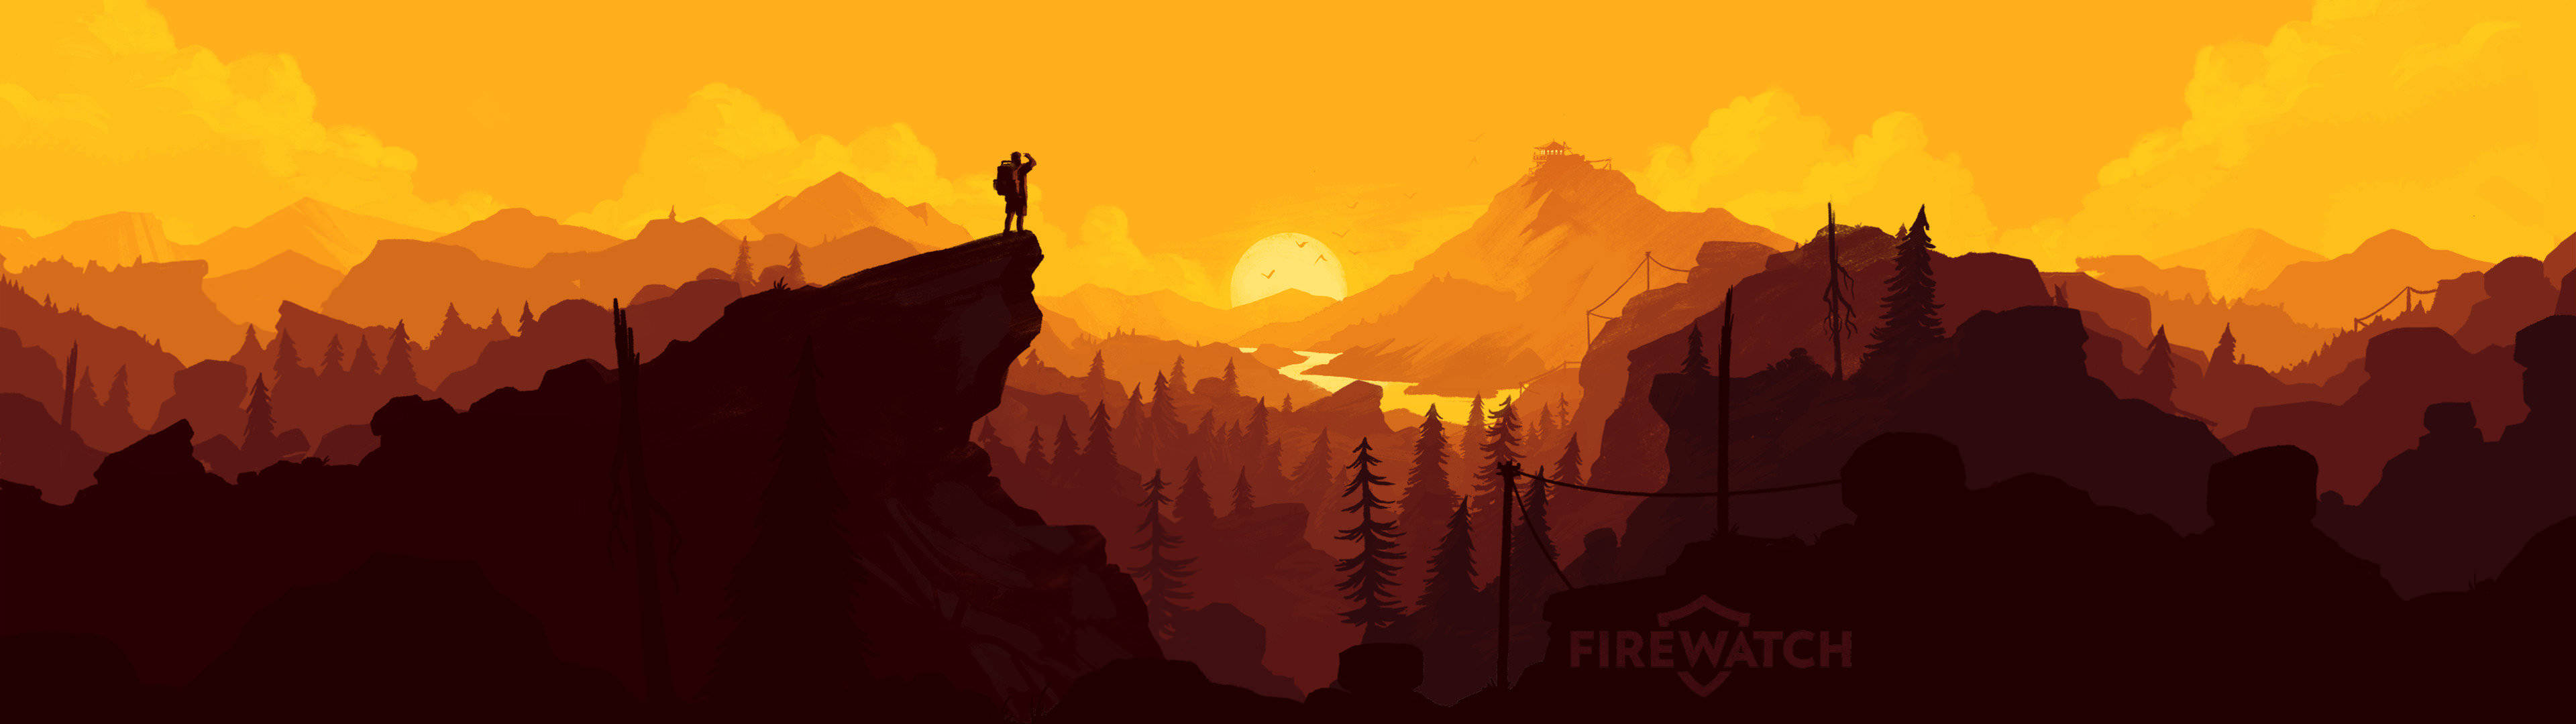 Get Lost In The Adventure Of Dual Screen With Firewatch. Background